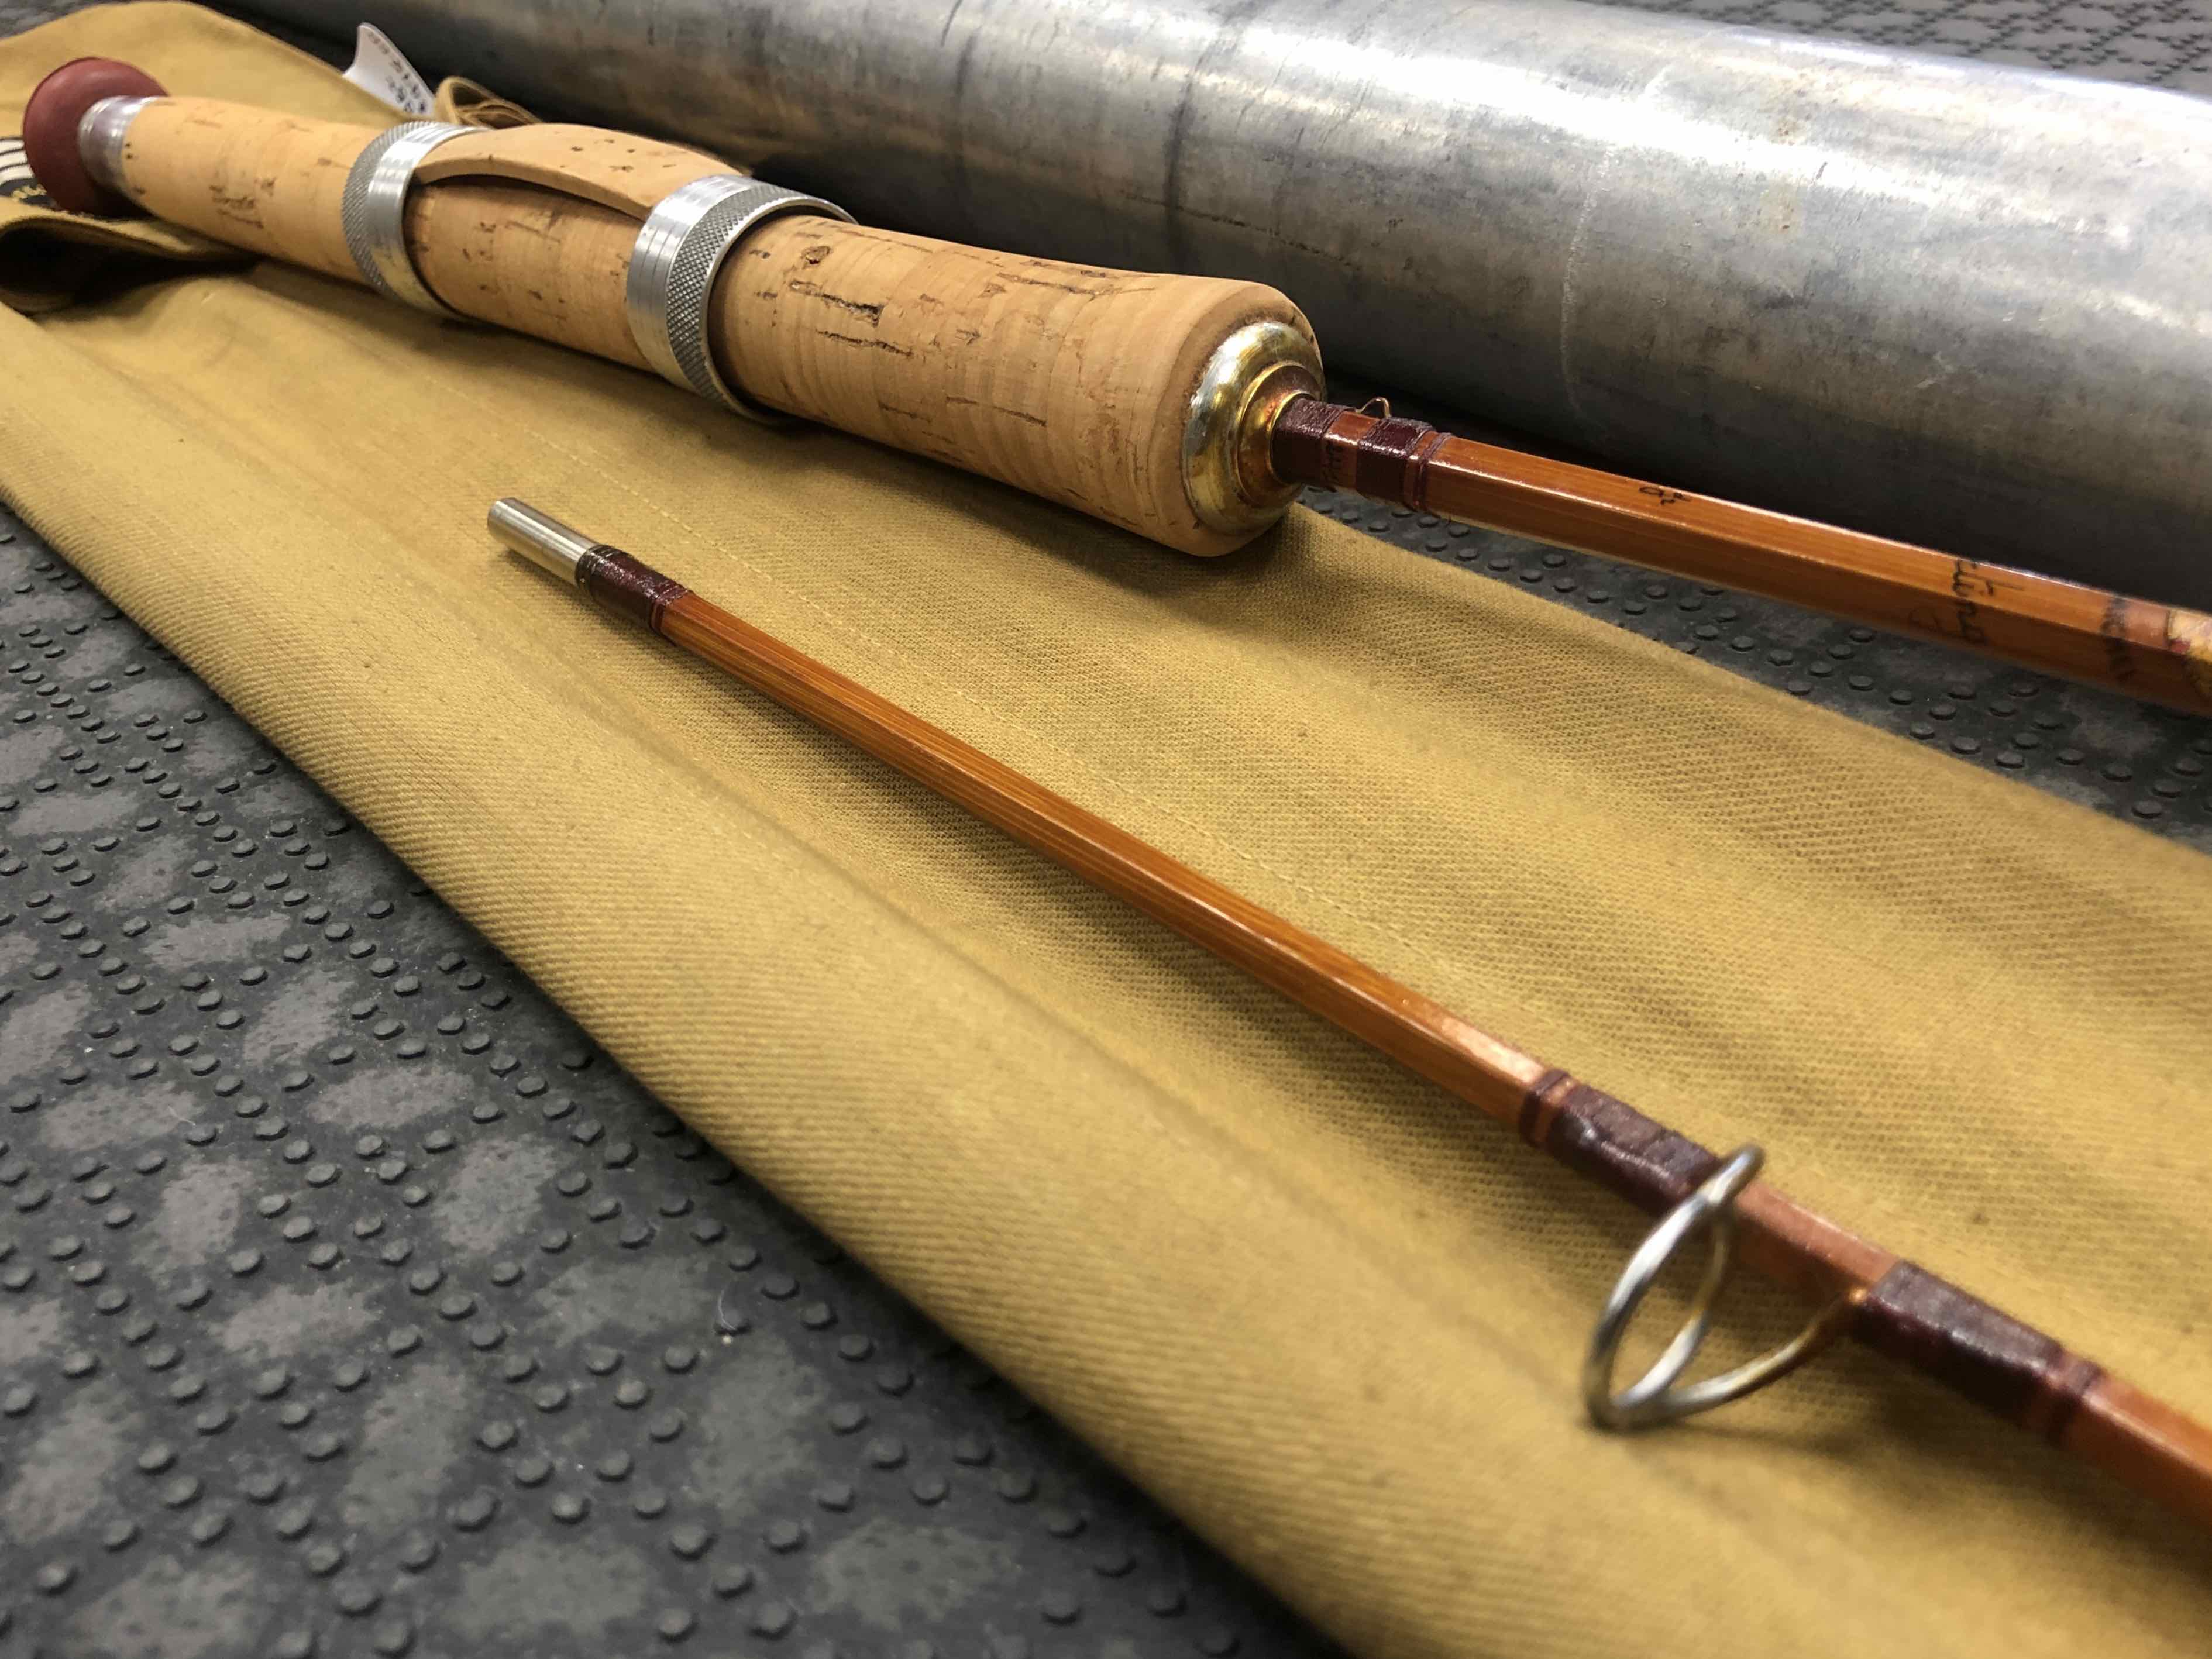 https://thefirstcast.ca/wp-content/uploads/2019/04/Collectors-Edition-Pezon-and-Michel-2piece-6foot-Bamboo-Spinning-Rod-From-1952-Made-in-France-Sporting-Model-BB2-Removed-from-Sock-twice-BB.jpg